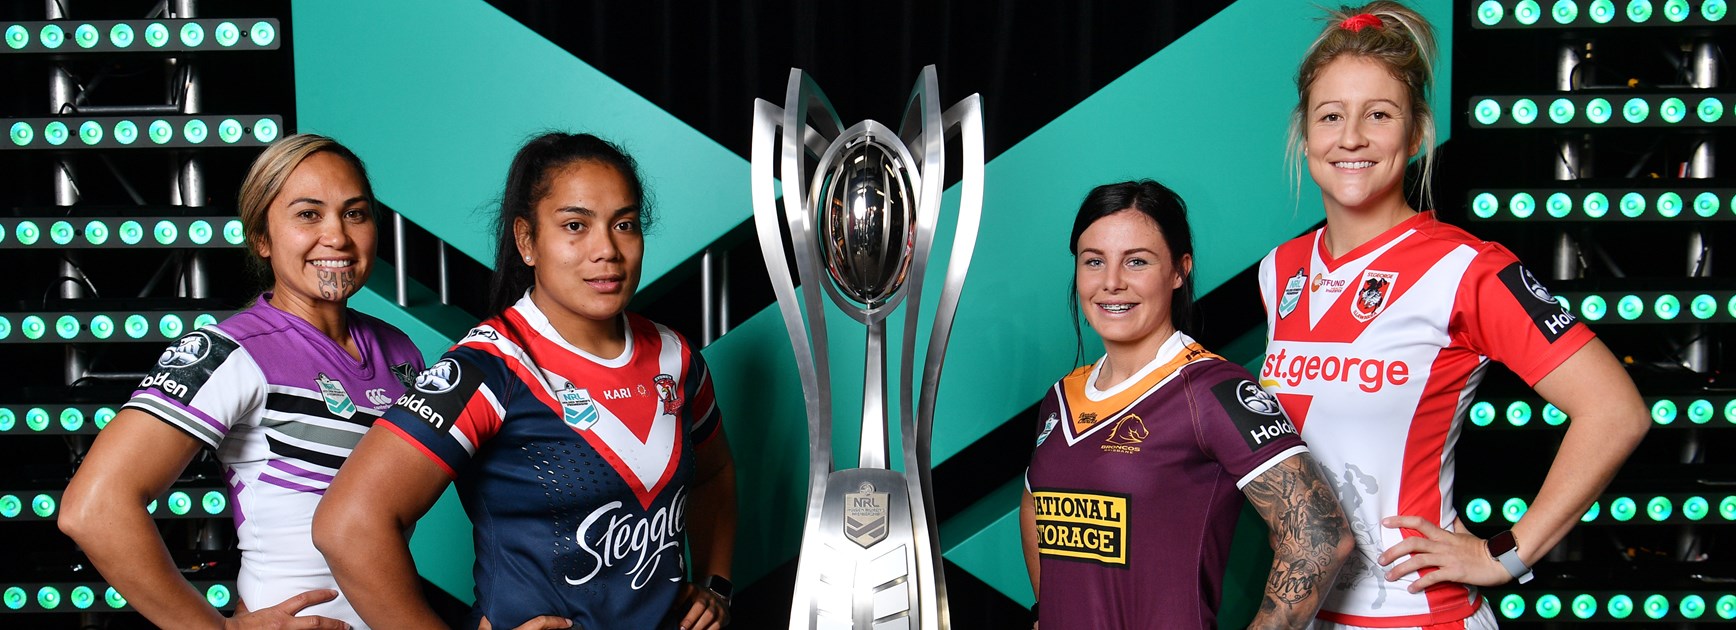 Opposed session with men has Roosters women ready